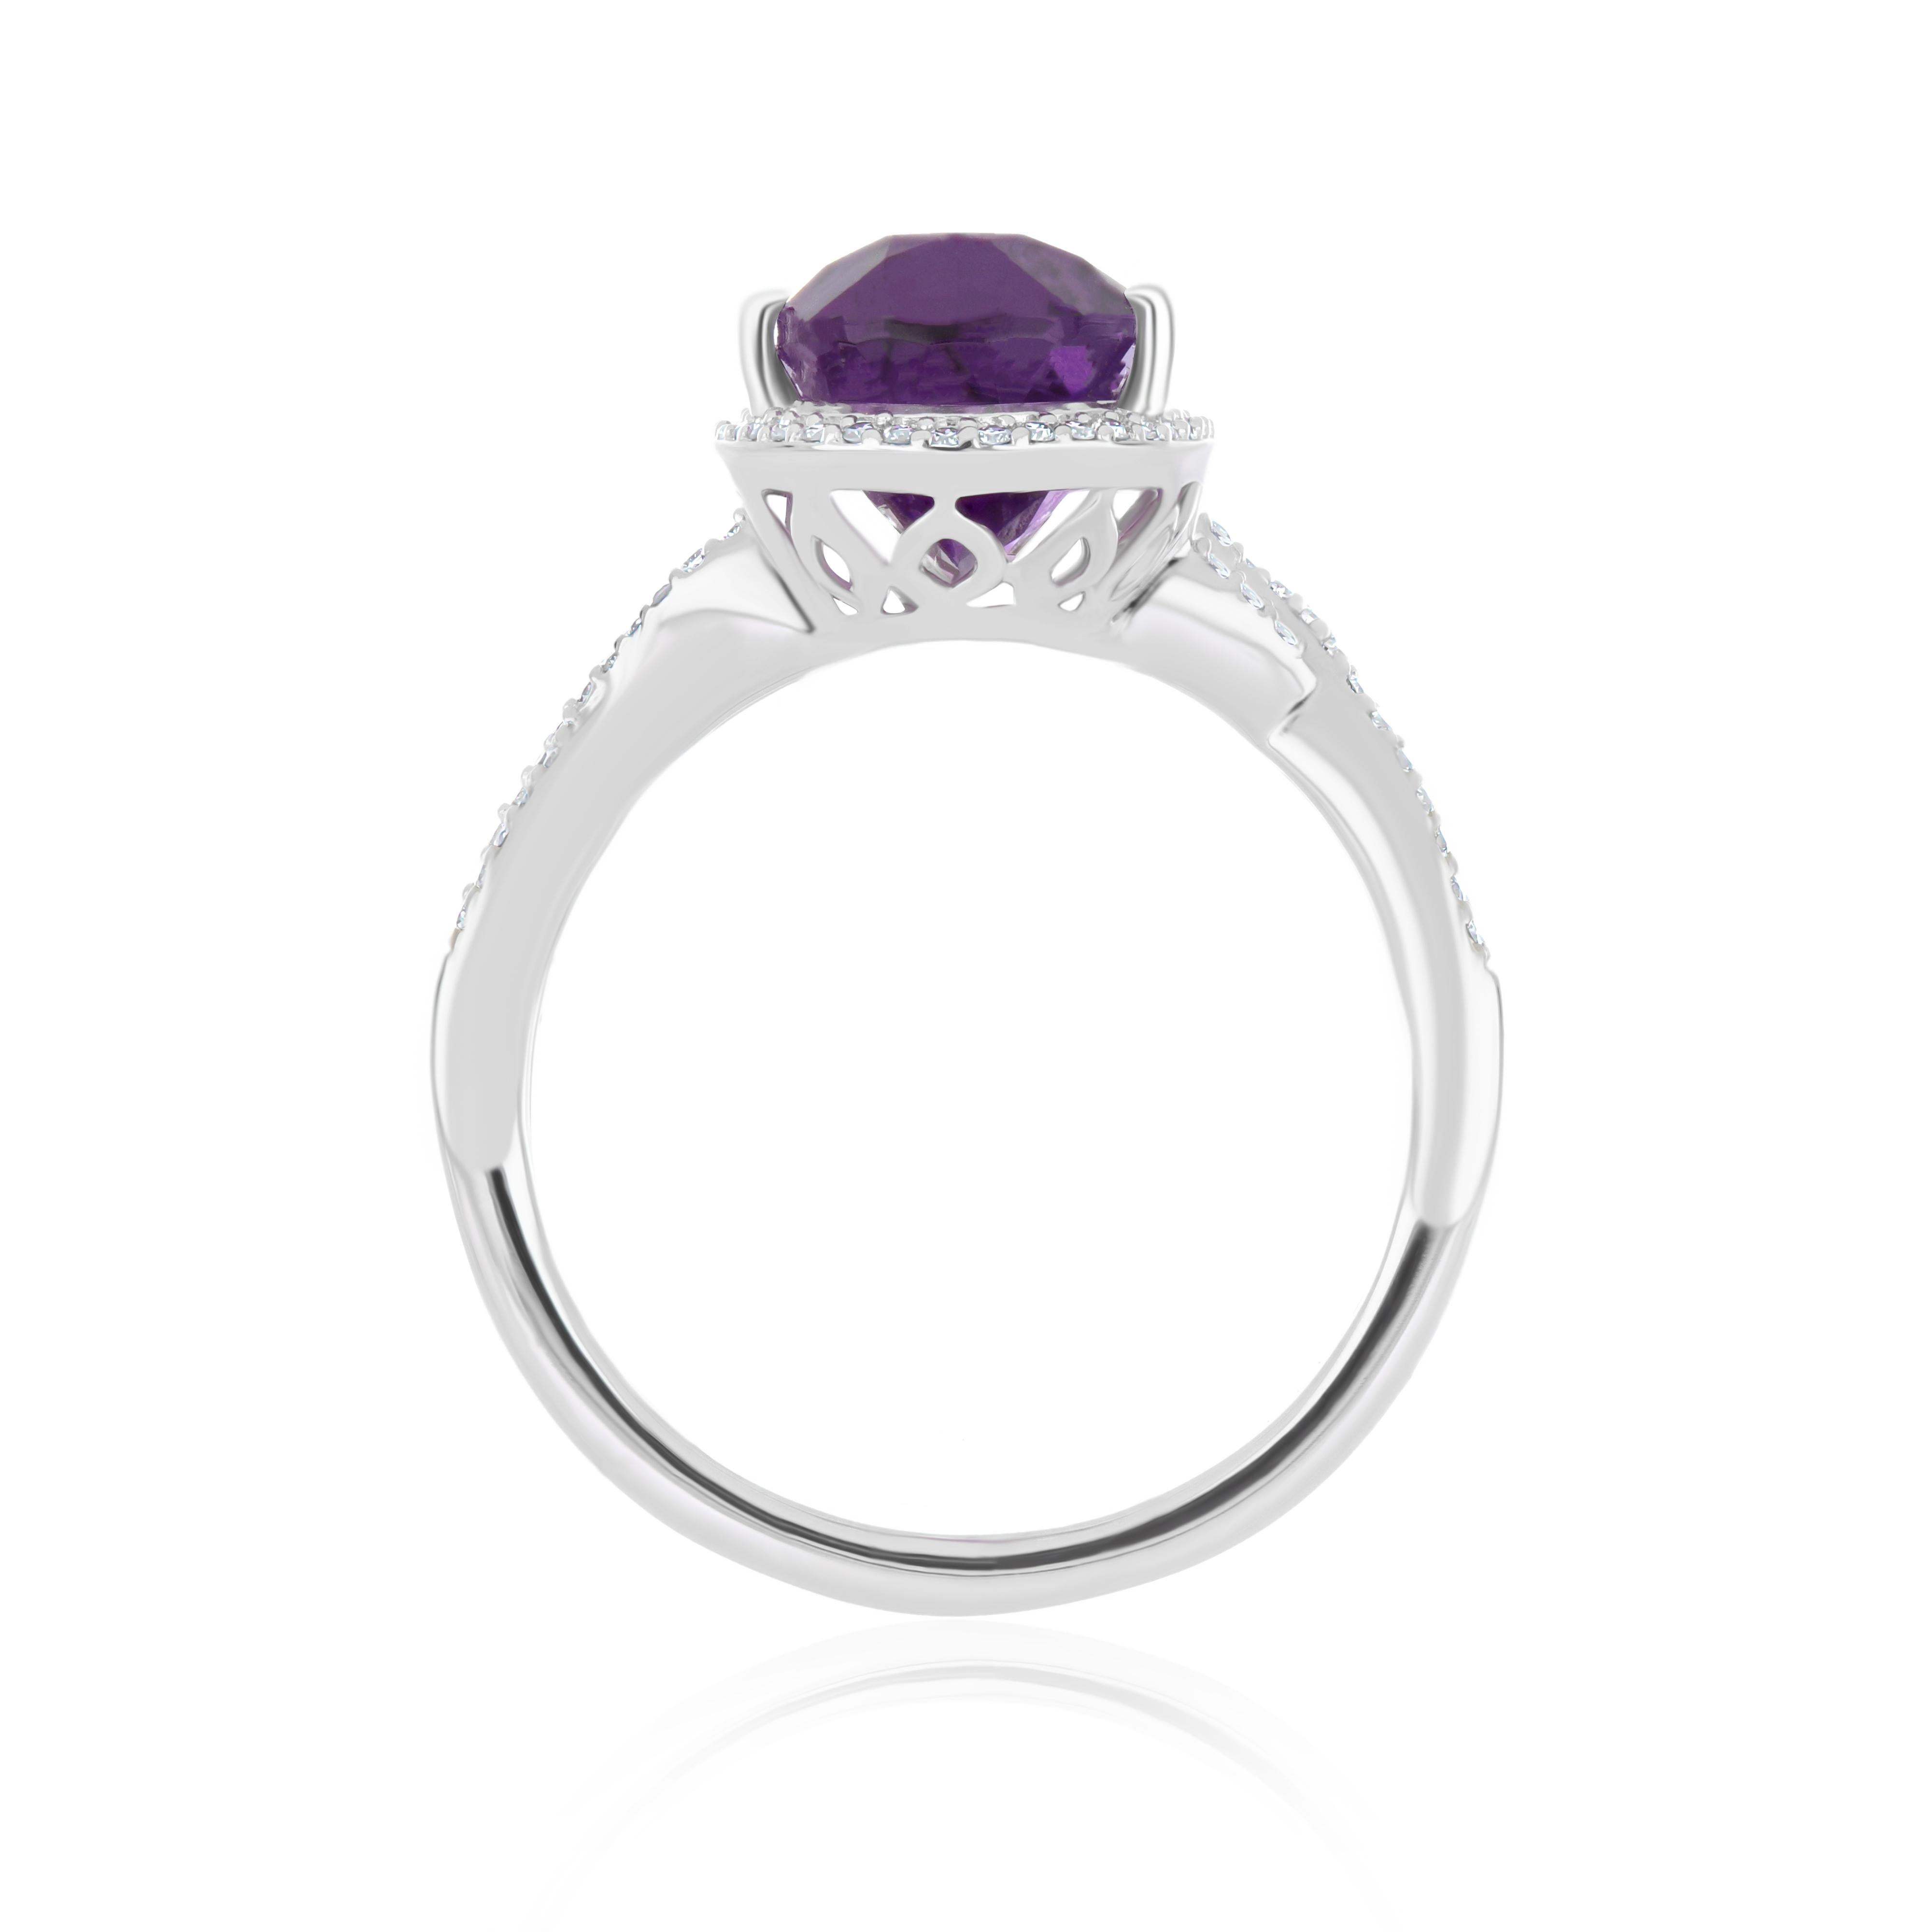 For Sale:  6.11 Carat Amethyst and Diamond Ring in 14 Karat White Gold Ring  5